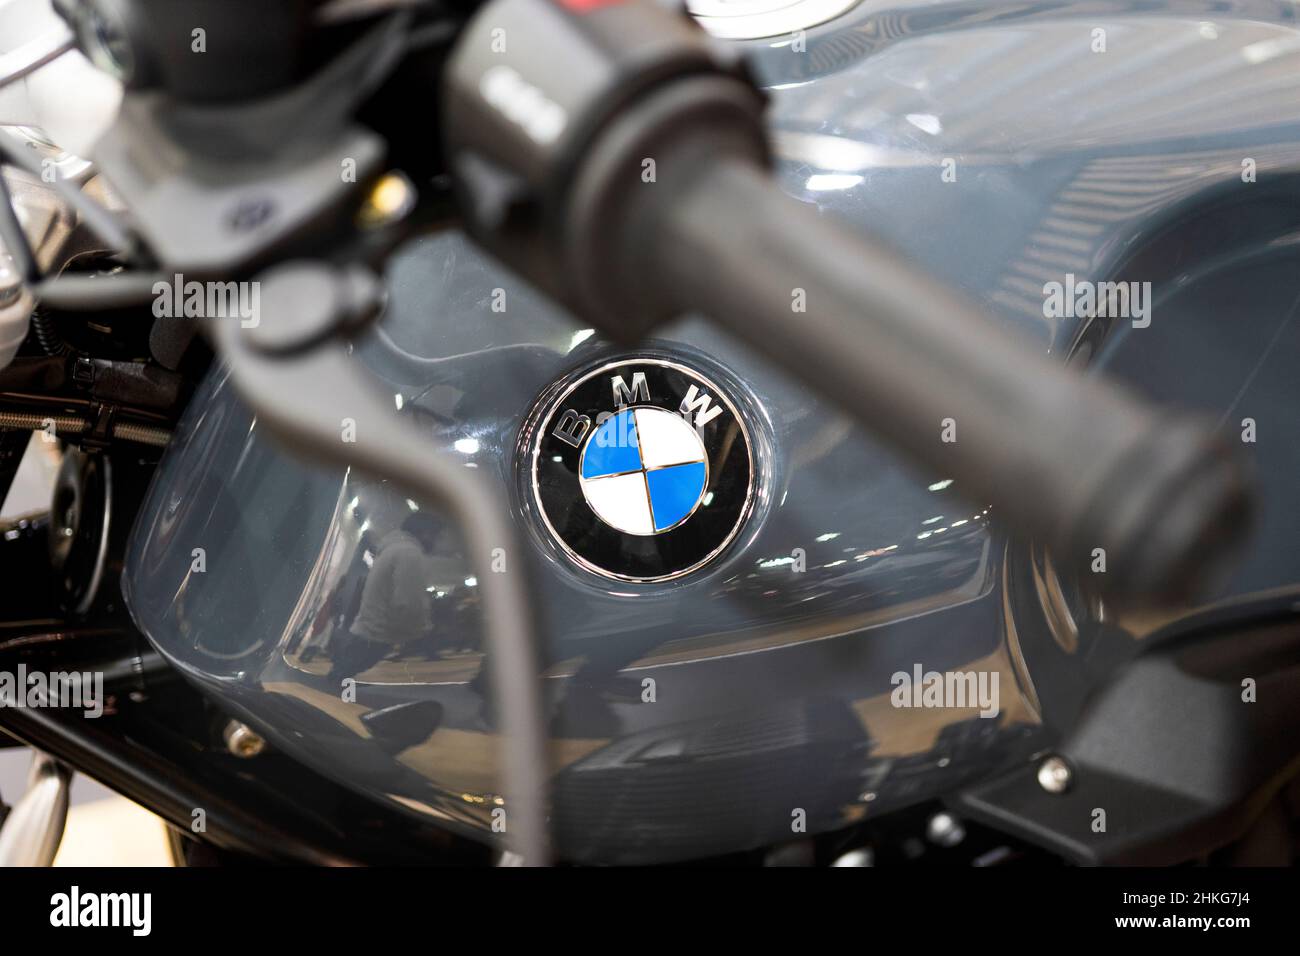 Close up of a BMW logo on motorcycle tank. Stock Photo